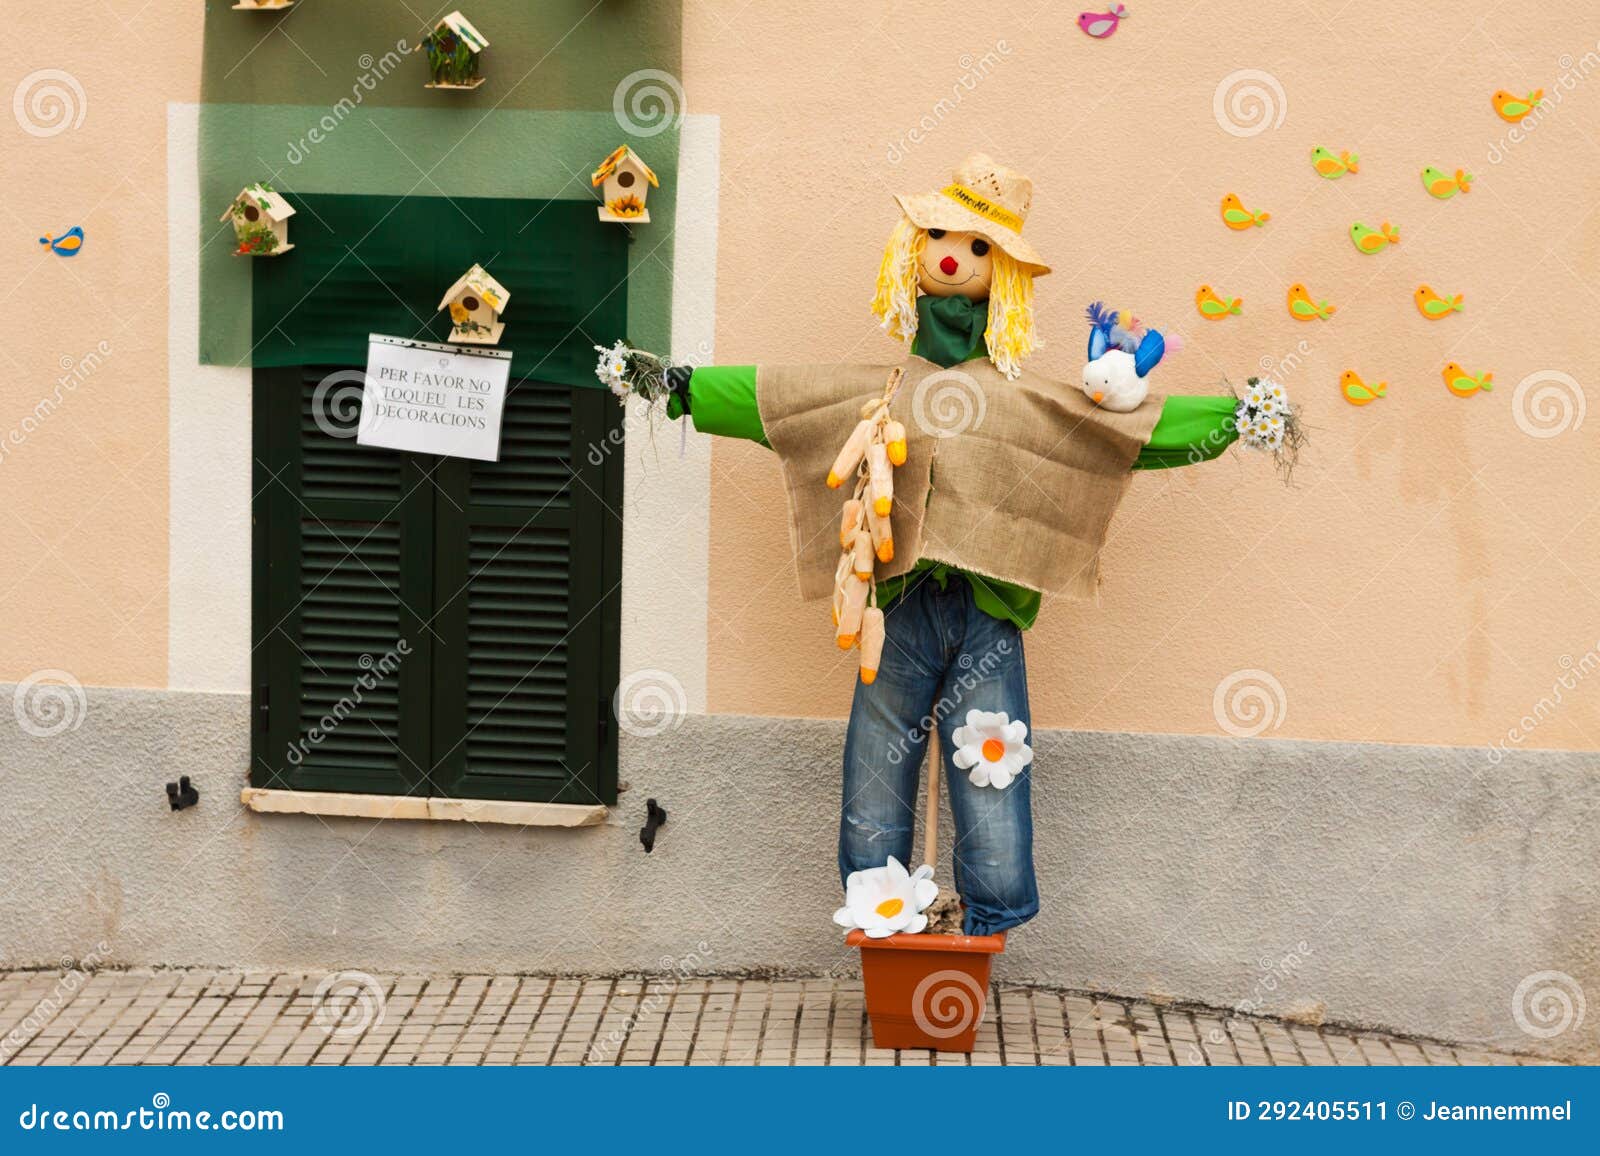 scarecrow, decorated with flowers, birds and birdhouses, on costitx en flor